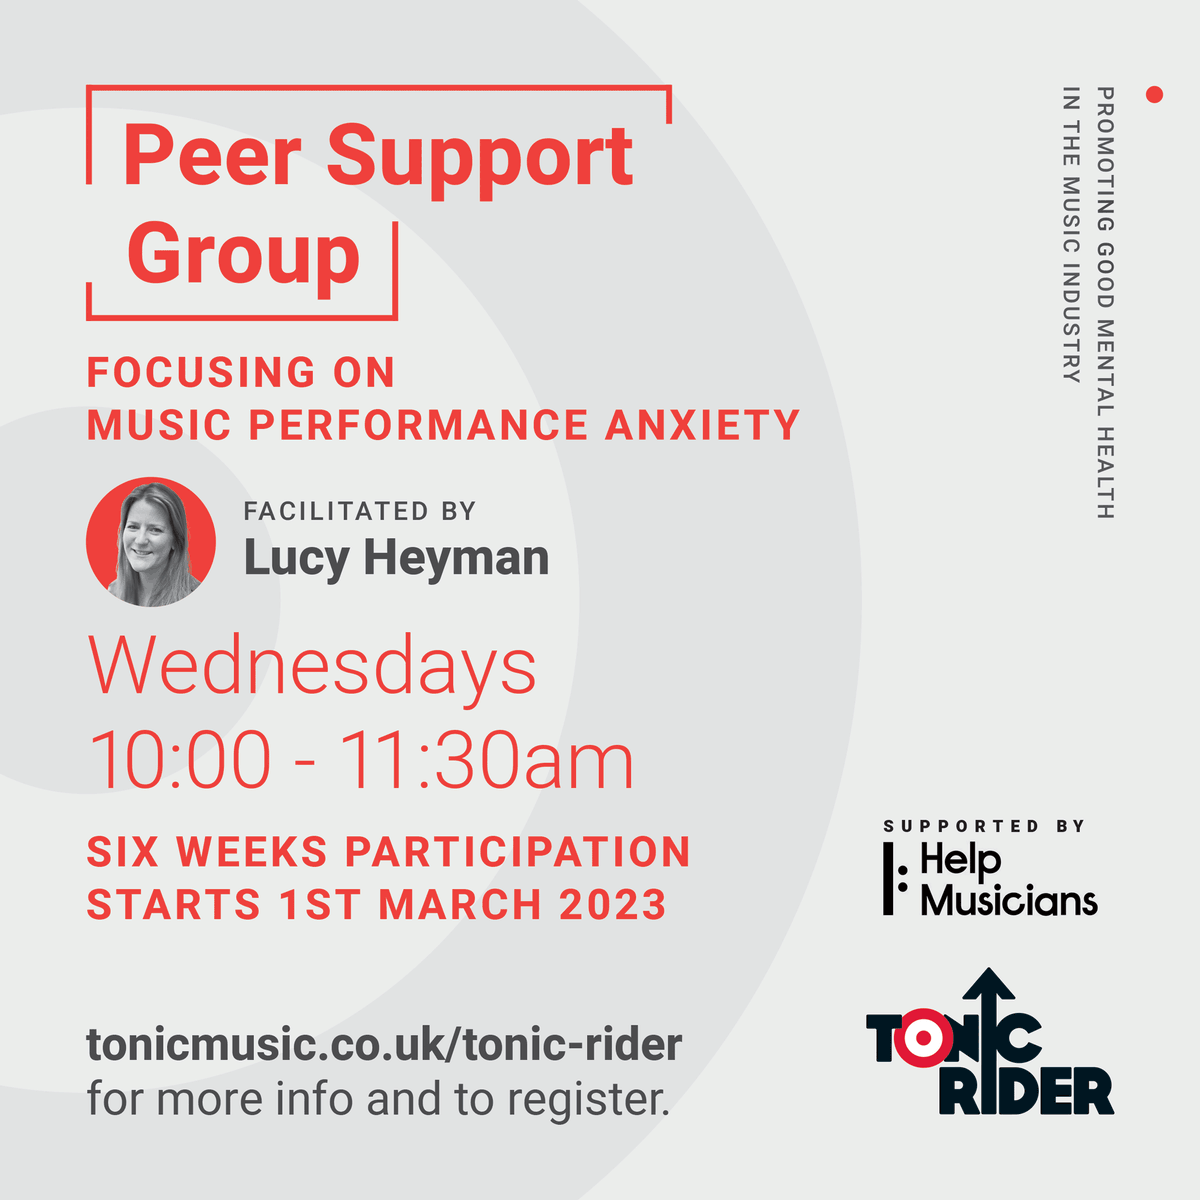 Last few days left to register!

Peer Support Group (online) on music performance anxiety (funded by @HelpMusicians)

facilitated by @lucindaheyman

FREE to ALL working musicians in the UK

#TonicRider #MusicMindsMatter #Performance #Anxiety #MentalHealth #Wellbeing #Music